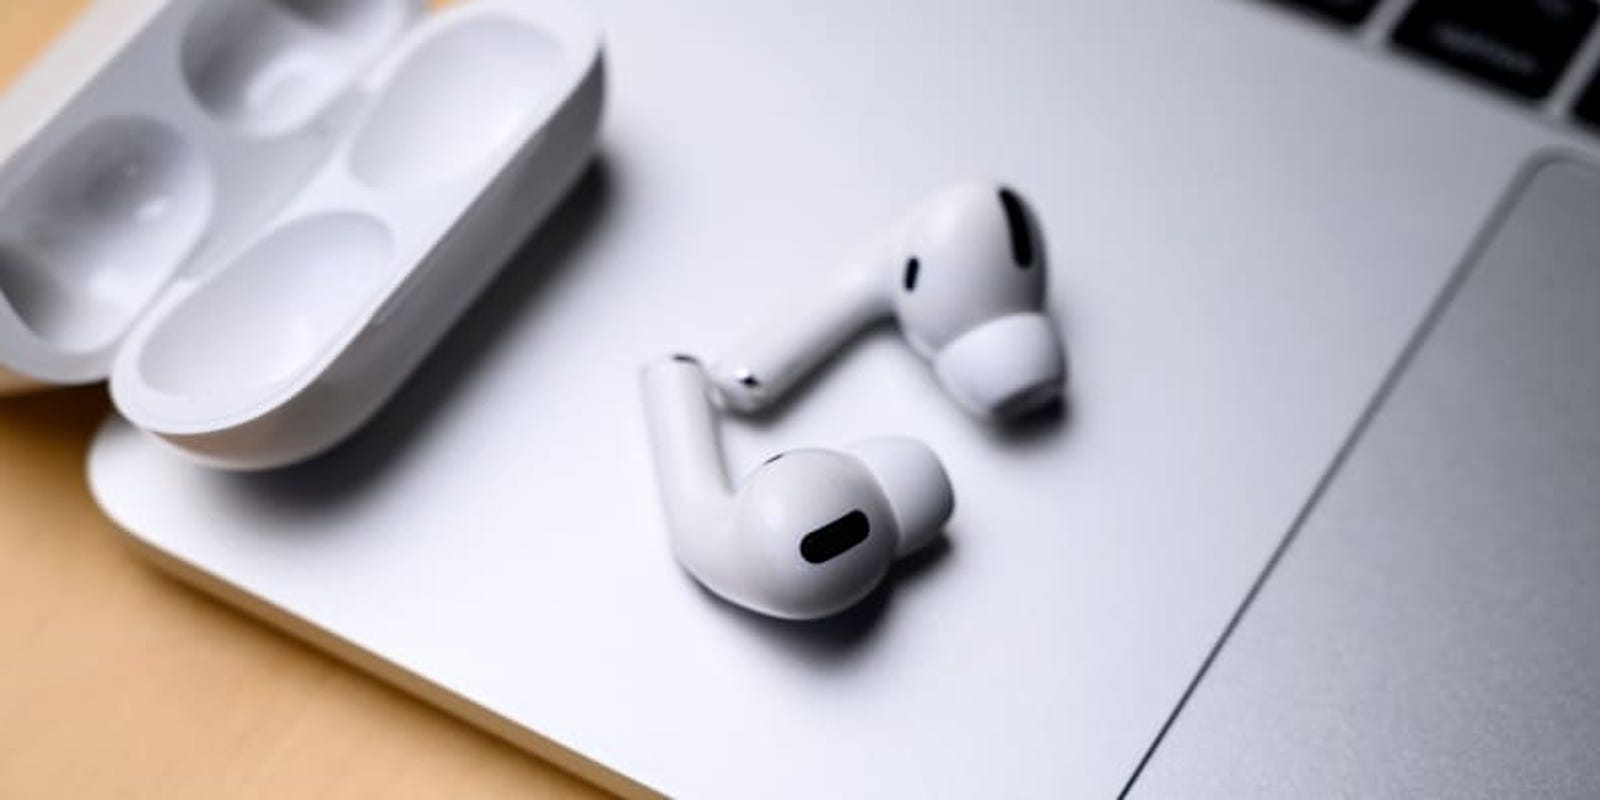 Apple AirPods Pro sale: Get the best wireless earbuds at a new low on Amazon